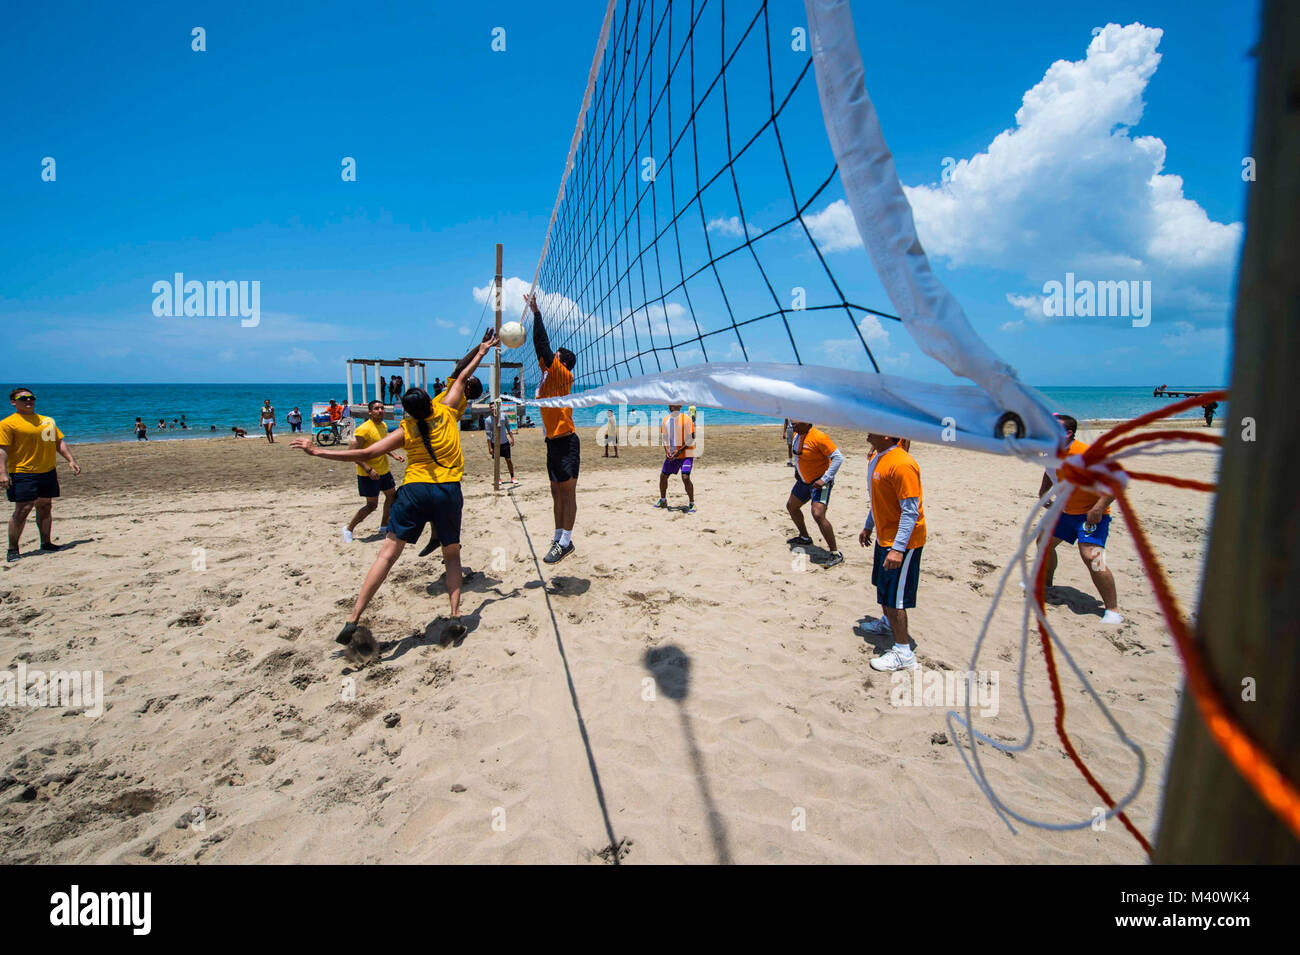 150830-N-NK134-172 TRUJILLO, Honduras (Aug. 30, 2015) - Sailors, assigned to Military Sealift Command hospital ship USNS Comfort (T-AH 20), participate in a volleyball game with Honduran service members at Cortesia de Restaurante during a community relations event in support of Continuing Promise 2015. Continuing Promise is a U.S. Southern Command-sponsored and U.S. Naval Forces Southern Command/U.S. 4th Fleet-conducted deployment to conduct civil-military operations including humanitarian-civil assistance, subject matter expert exchanges, medical, dental, veterinary and engineering support an Stock Photo